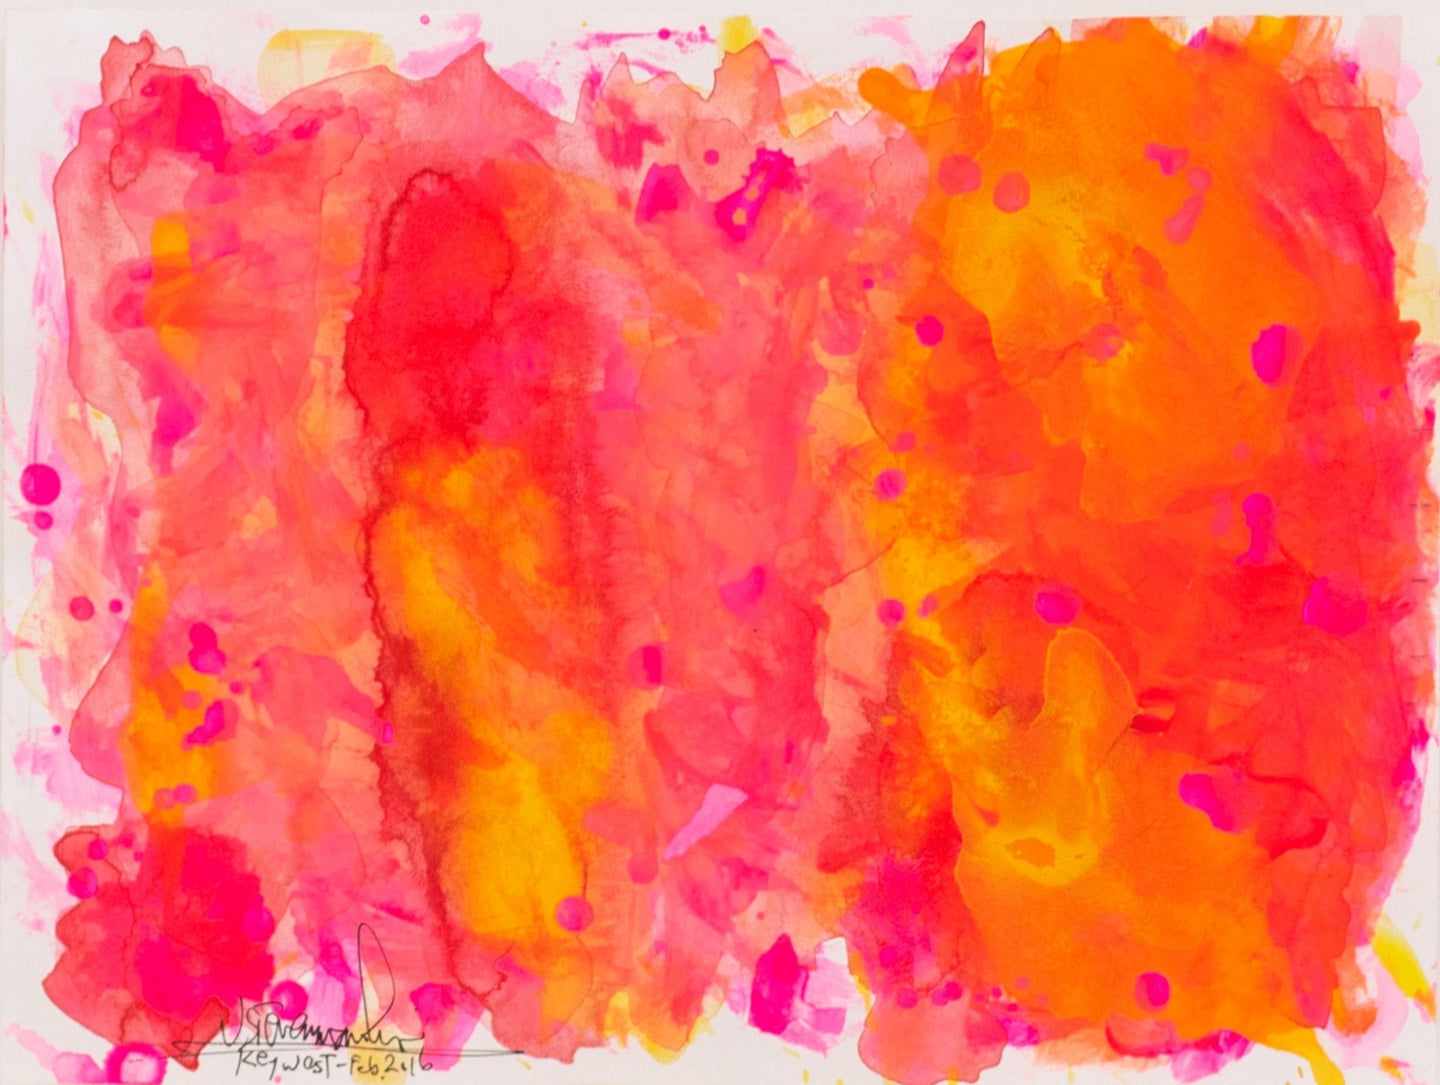 J. Steven Manolis, Flamingo 1832-2016 (Key West) 09.12.01, 2016, watercolor painting on paper, 9 x 12 inches, Pink and orange Abstract Art, Tropical Watercolor paintings for sale at Manolis Projects Art Gallery, Miami, Fl